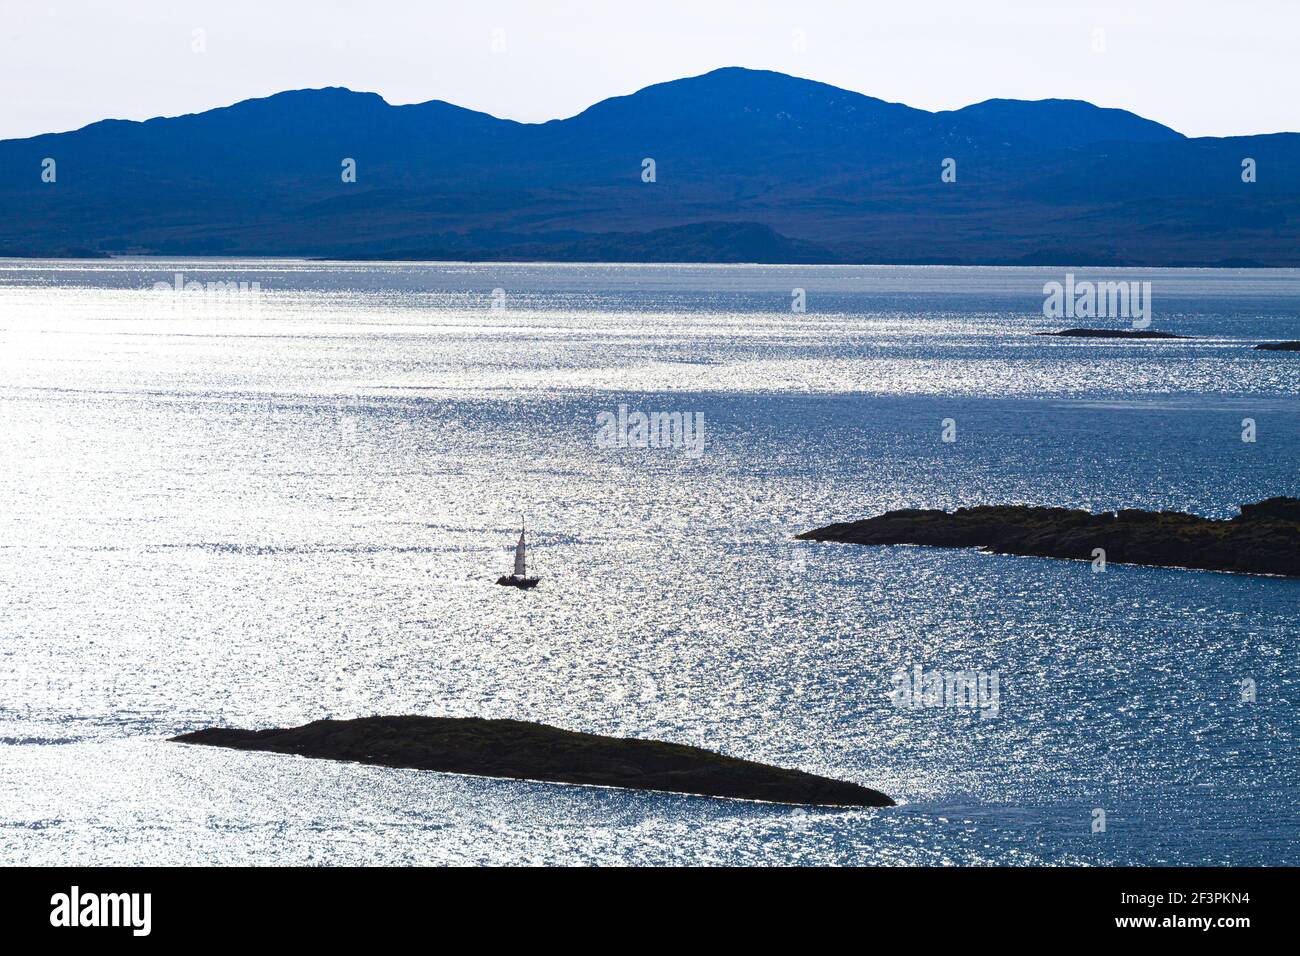 A yacht in the Sound of Jura about to enter Loch Sween viewed from the Knapdale Peninsula north of Kilmory, Argyll & Bute, Scotland UK - Stock Photo